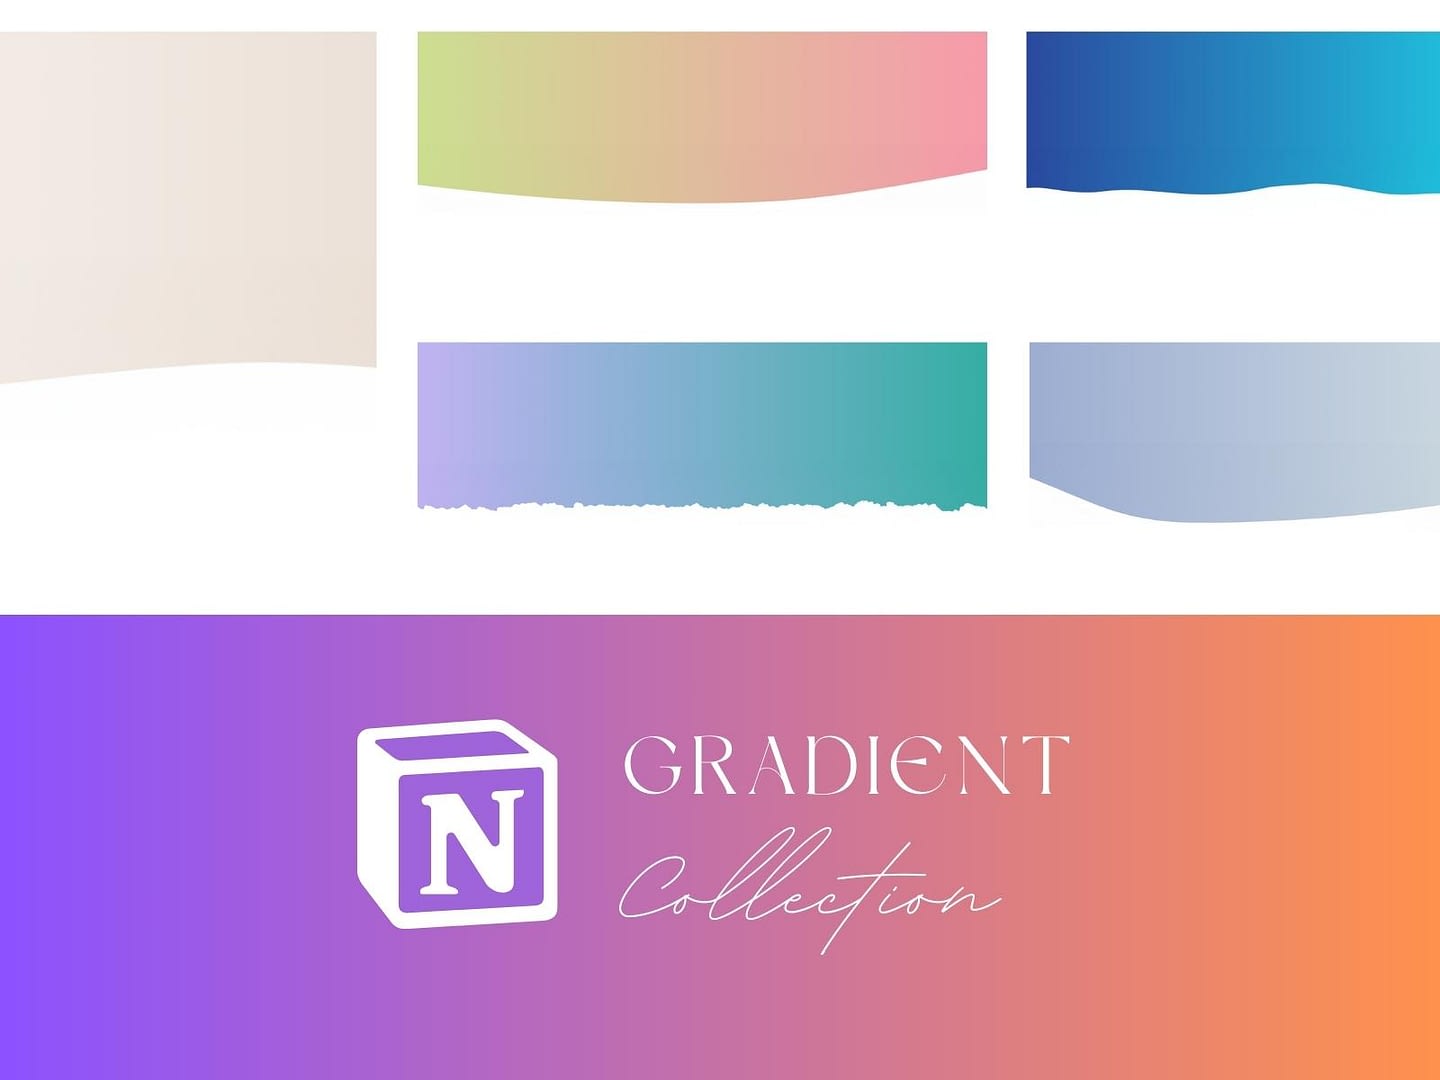 Gradient notion covers